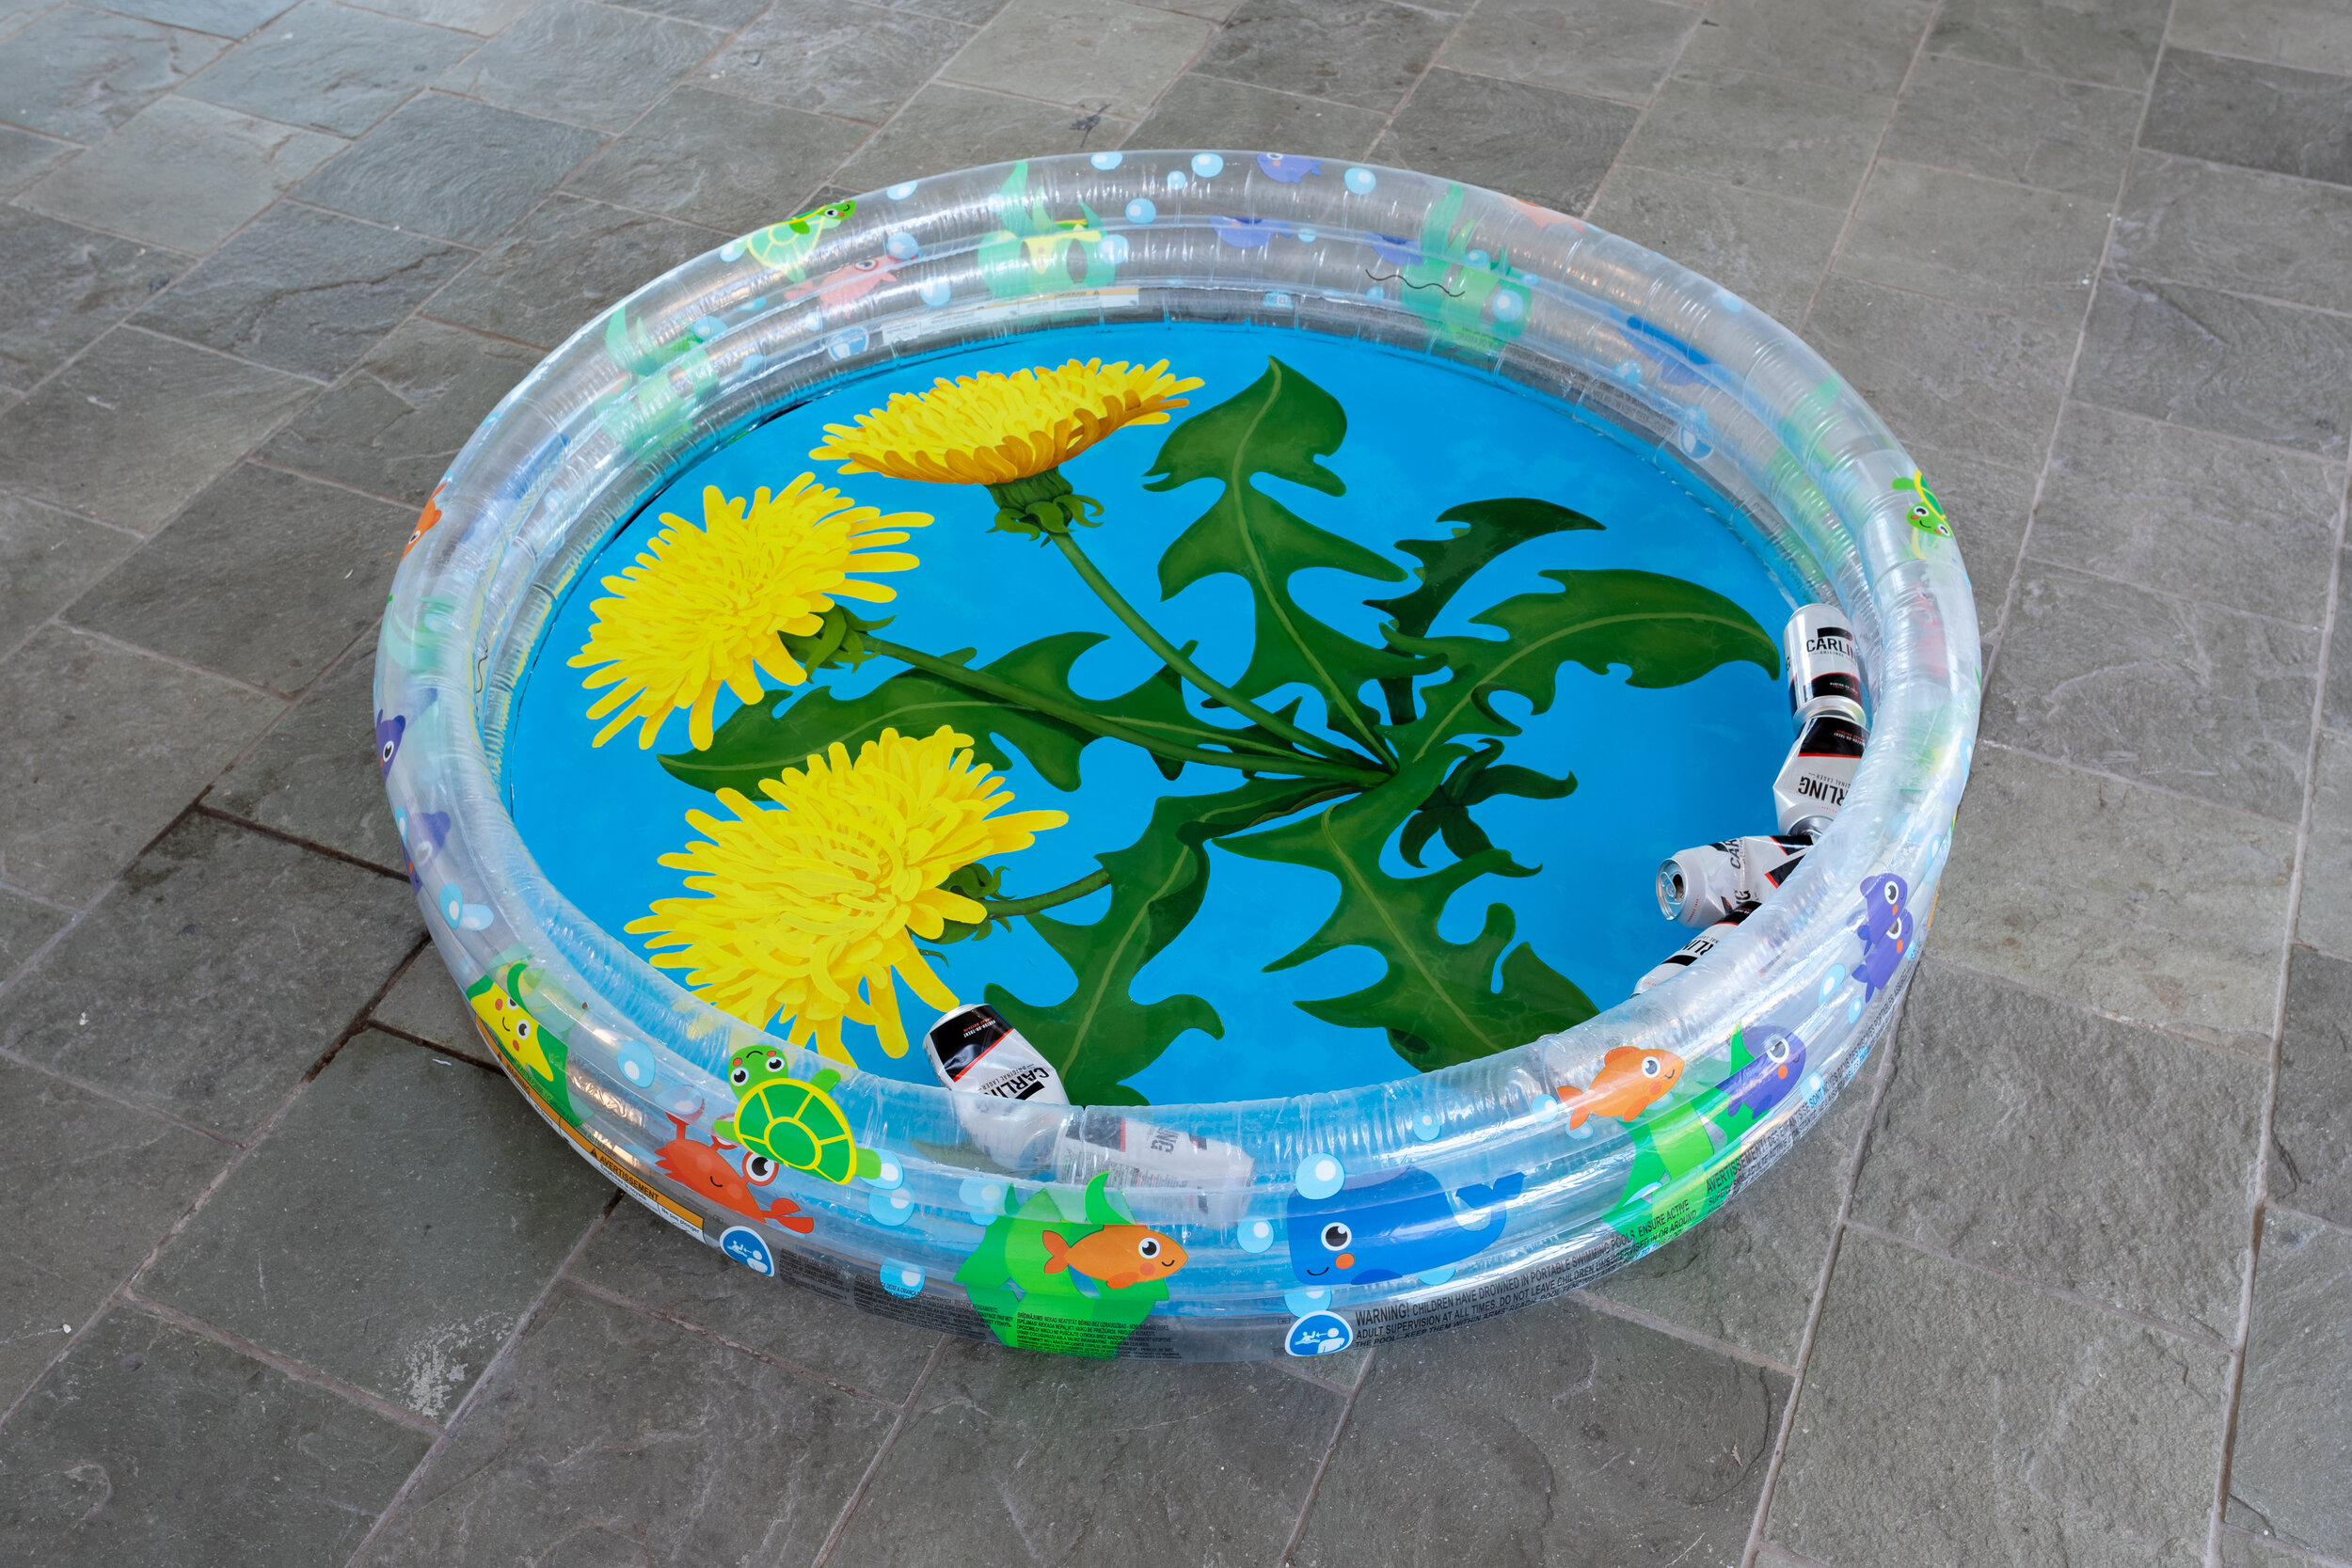 Conor Rogers , 'Lion' 2021, Acylic Paint, Paddling Pool, MDF board, Water, discarded beer cans. H152 x W152 X D30cm sculptural installation and painting. H152 x W152 X D30cm. jpg.jpg